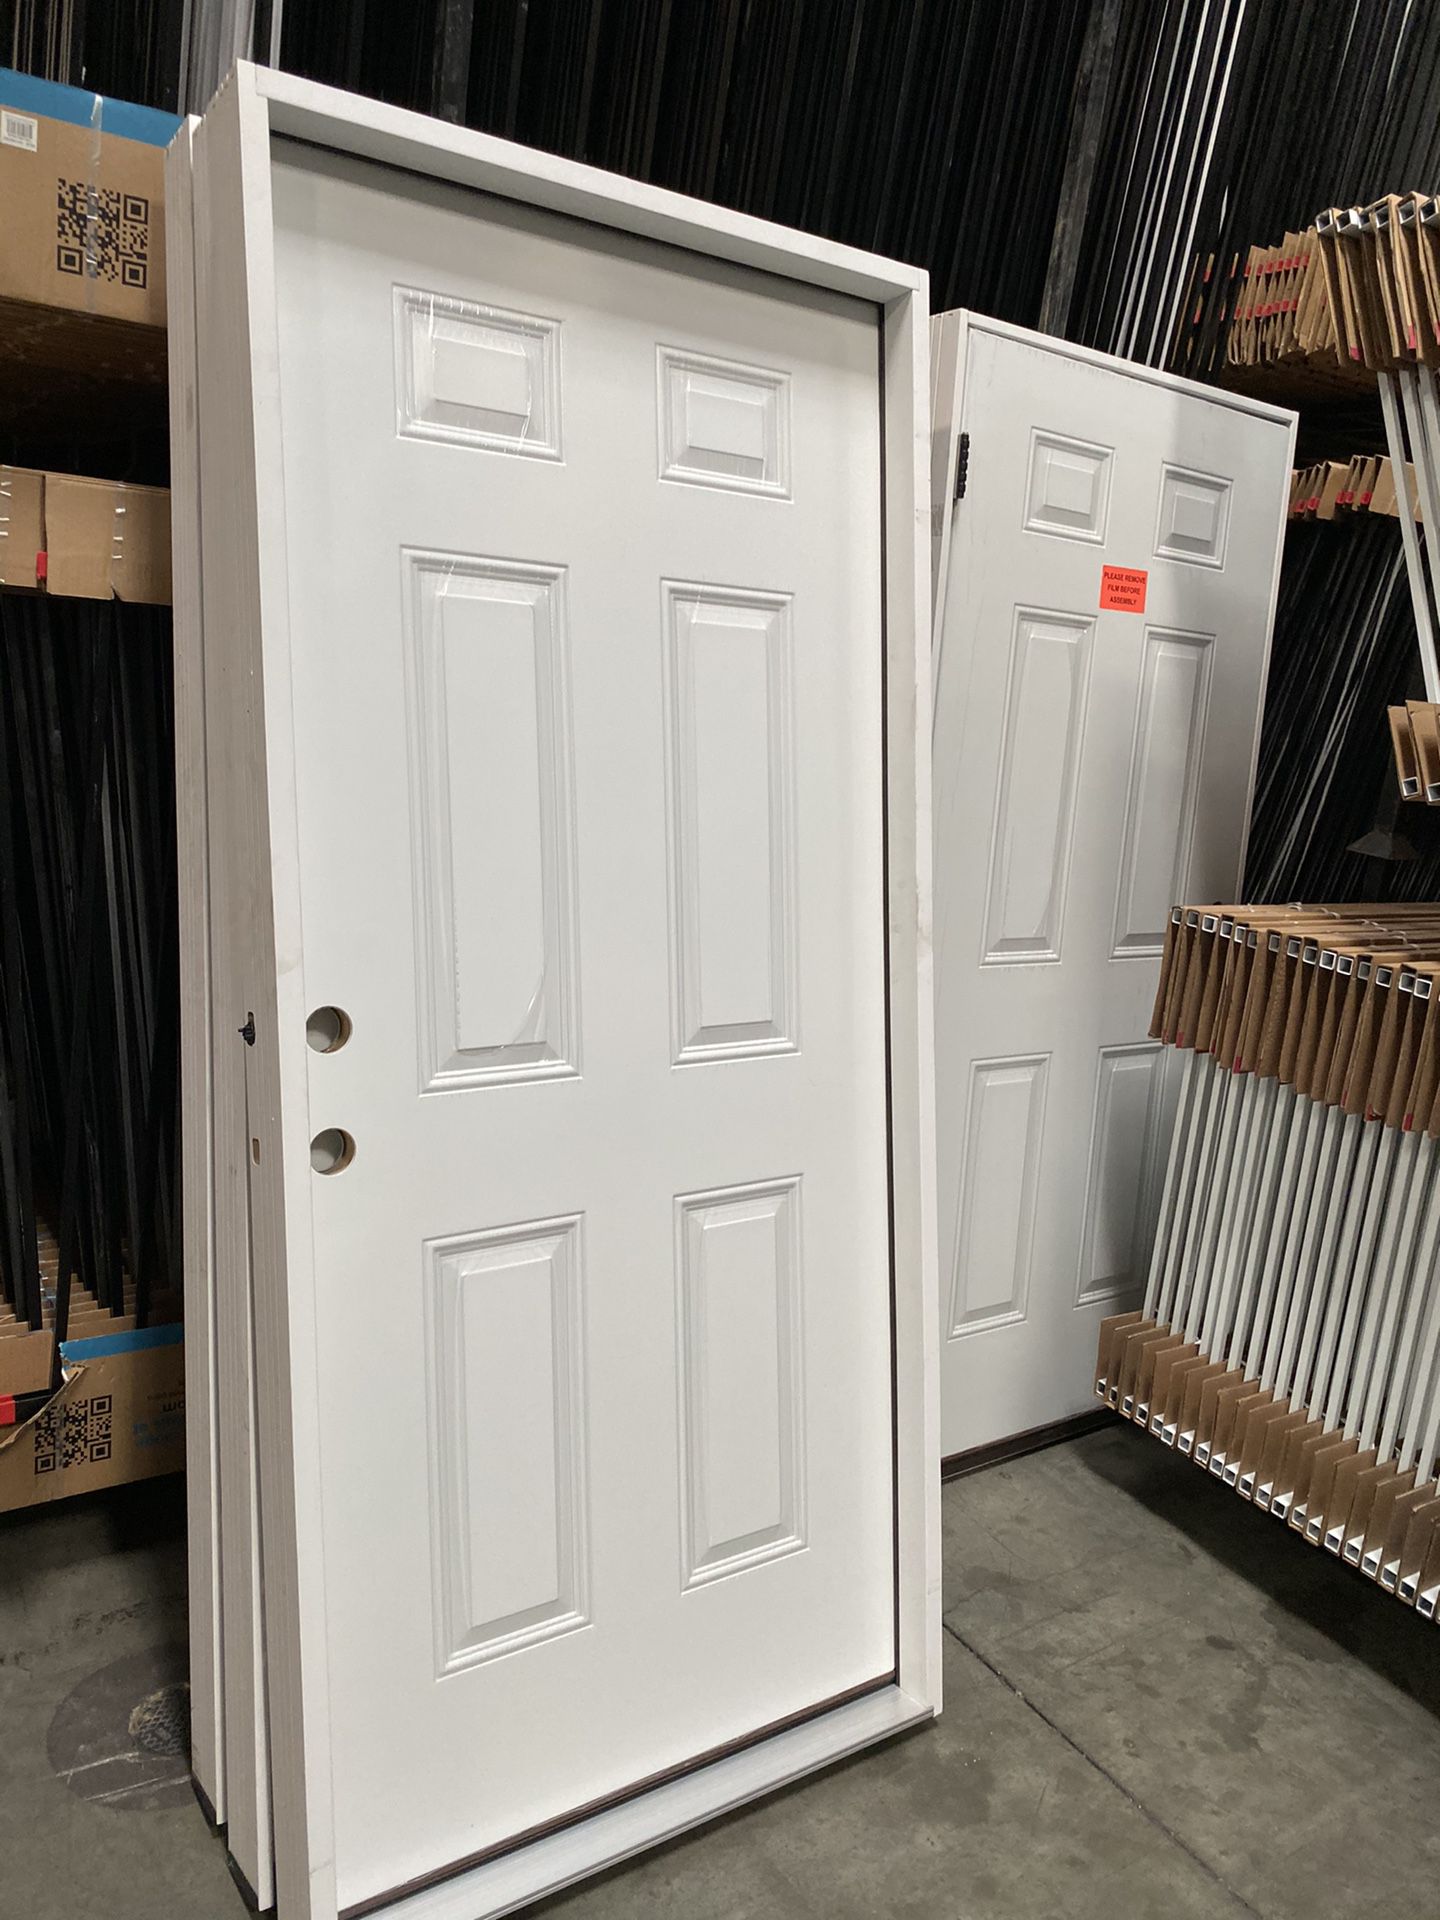 Pre hung entry door (solid steel and wood) 36x80